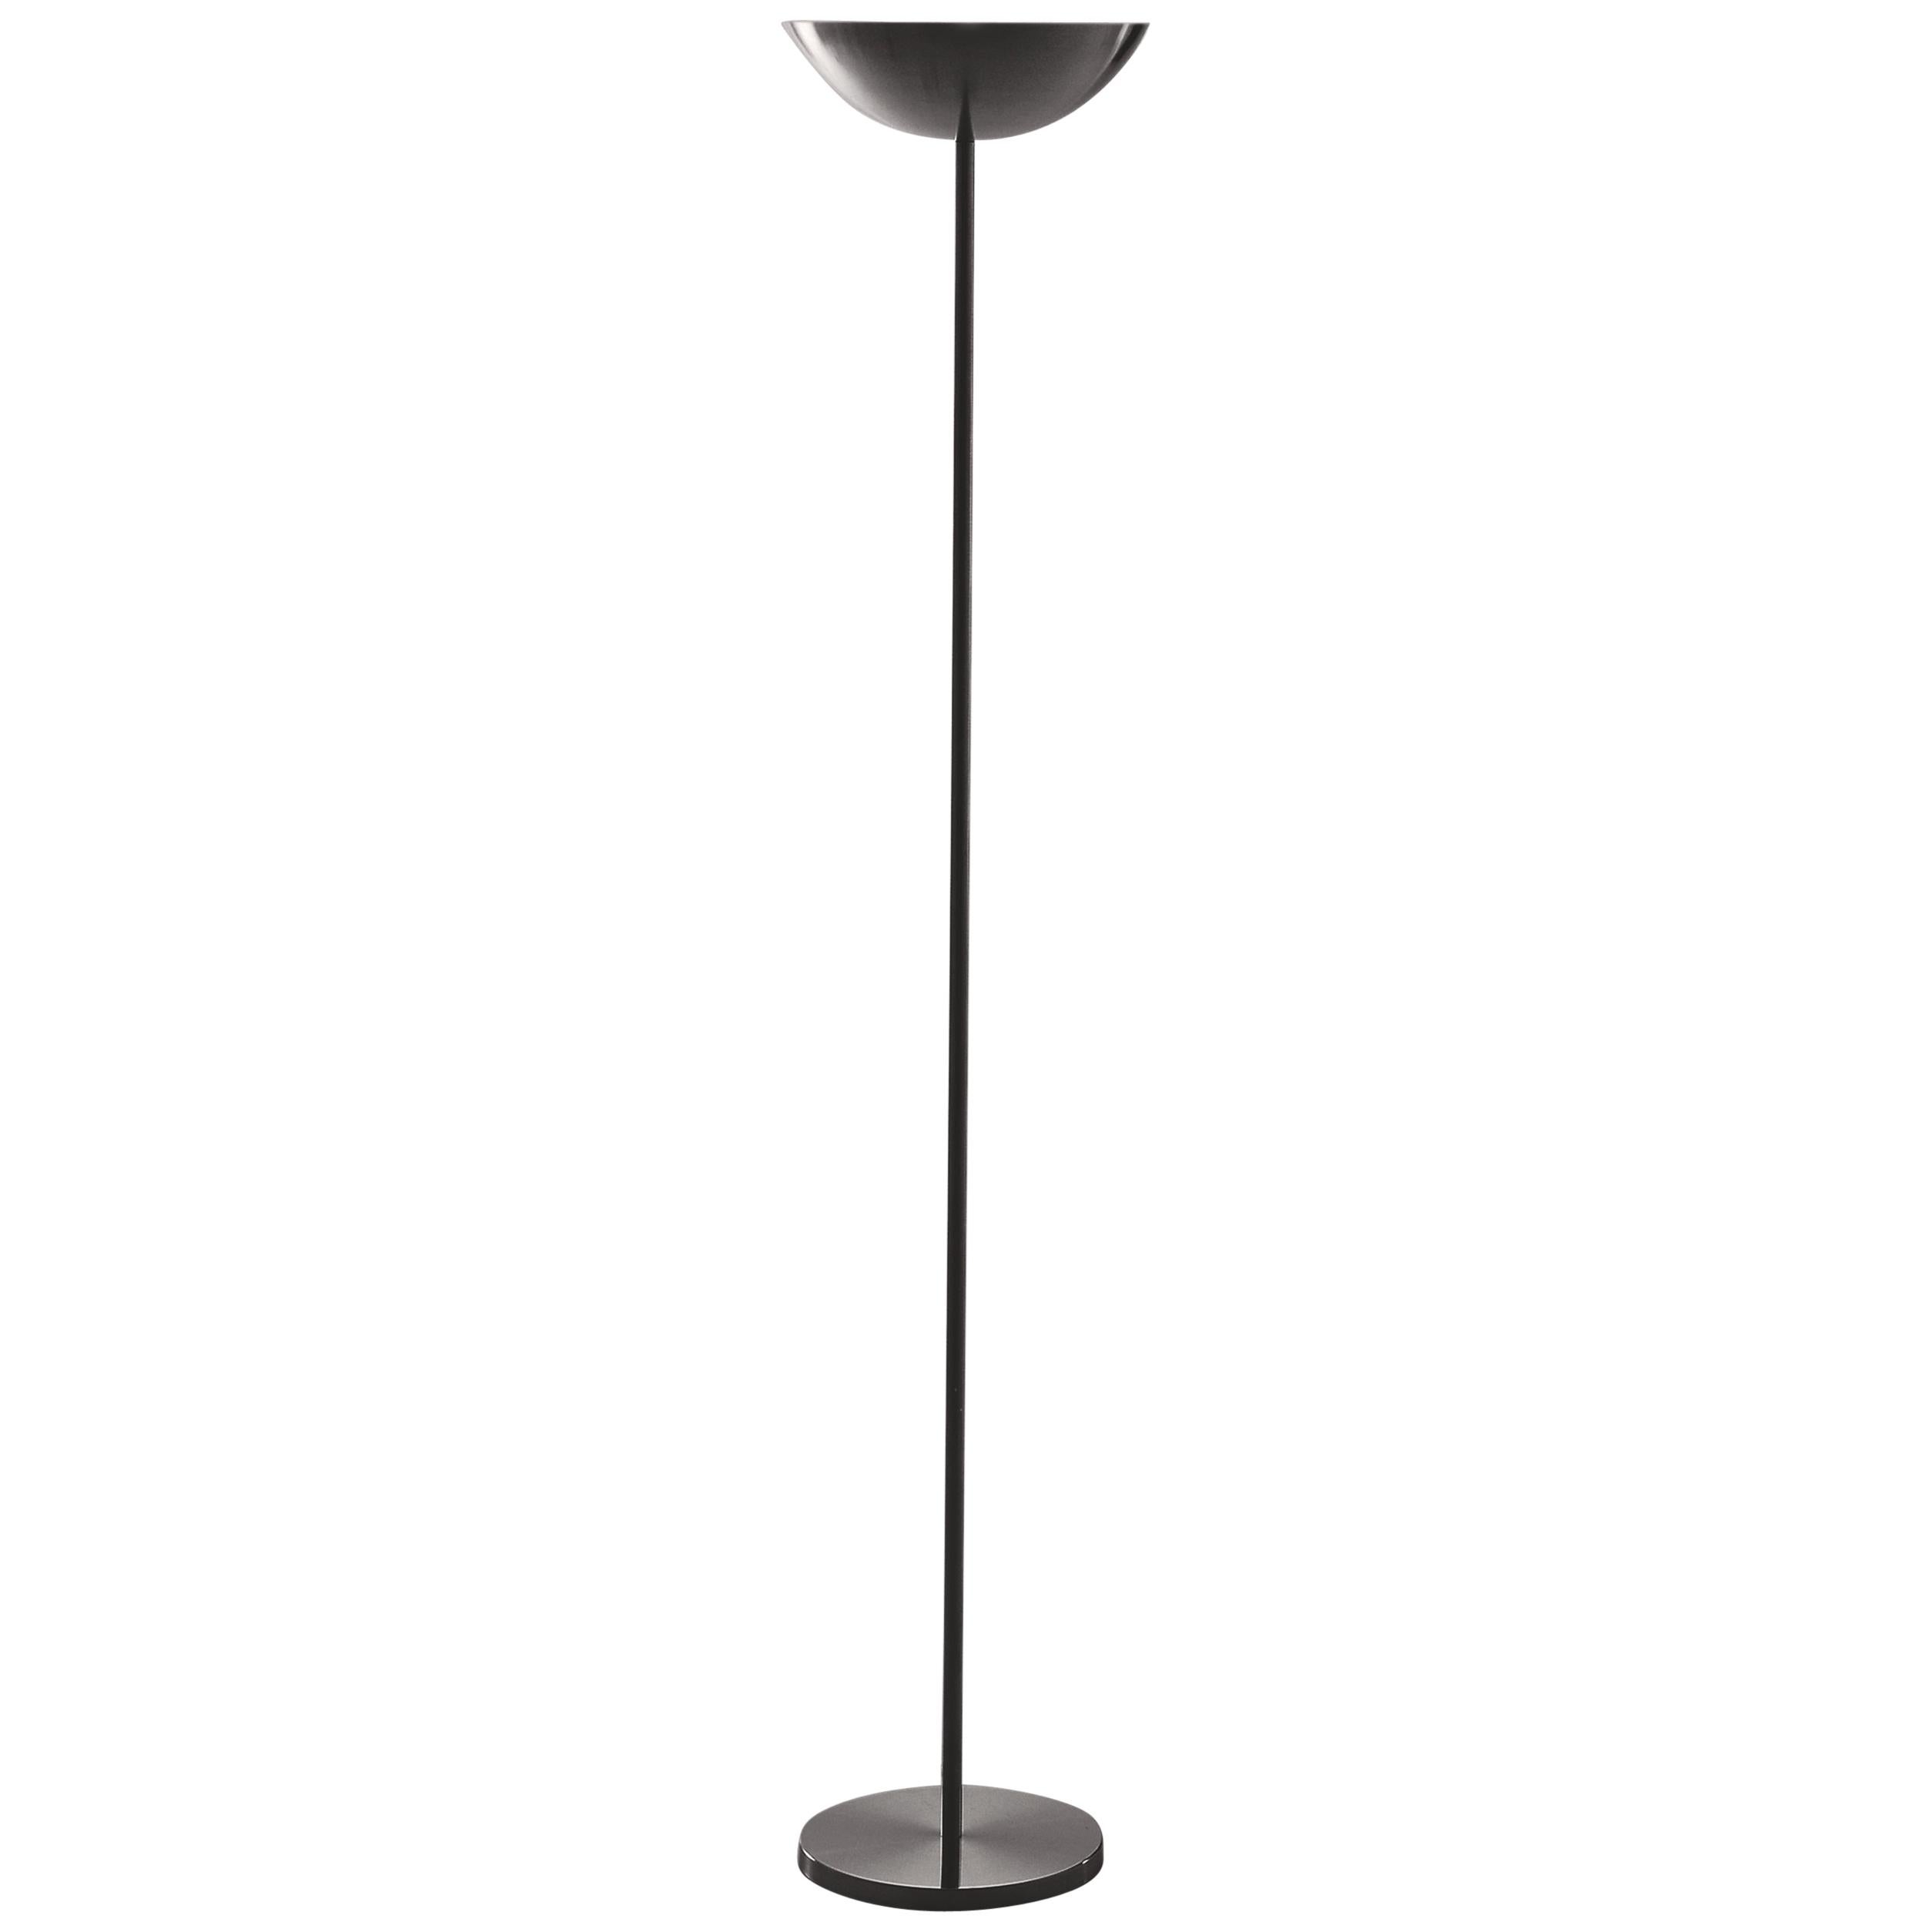 Martinelli Luce V.D.L 2234 Floor Lamp by Richard Neutra For Sale at 1stDibs